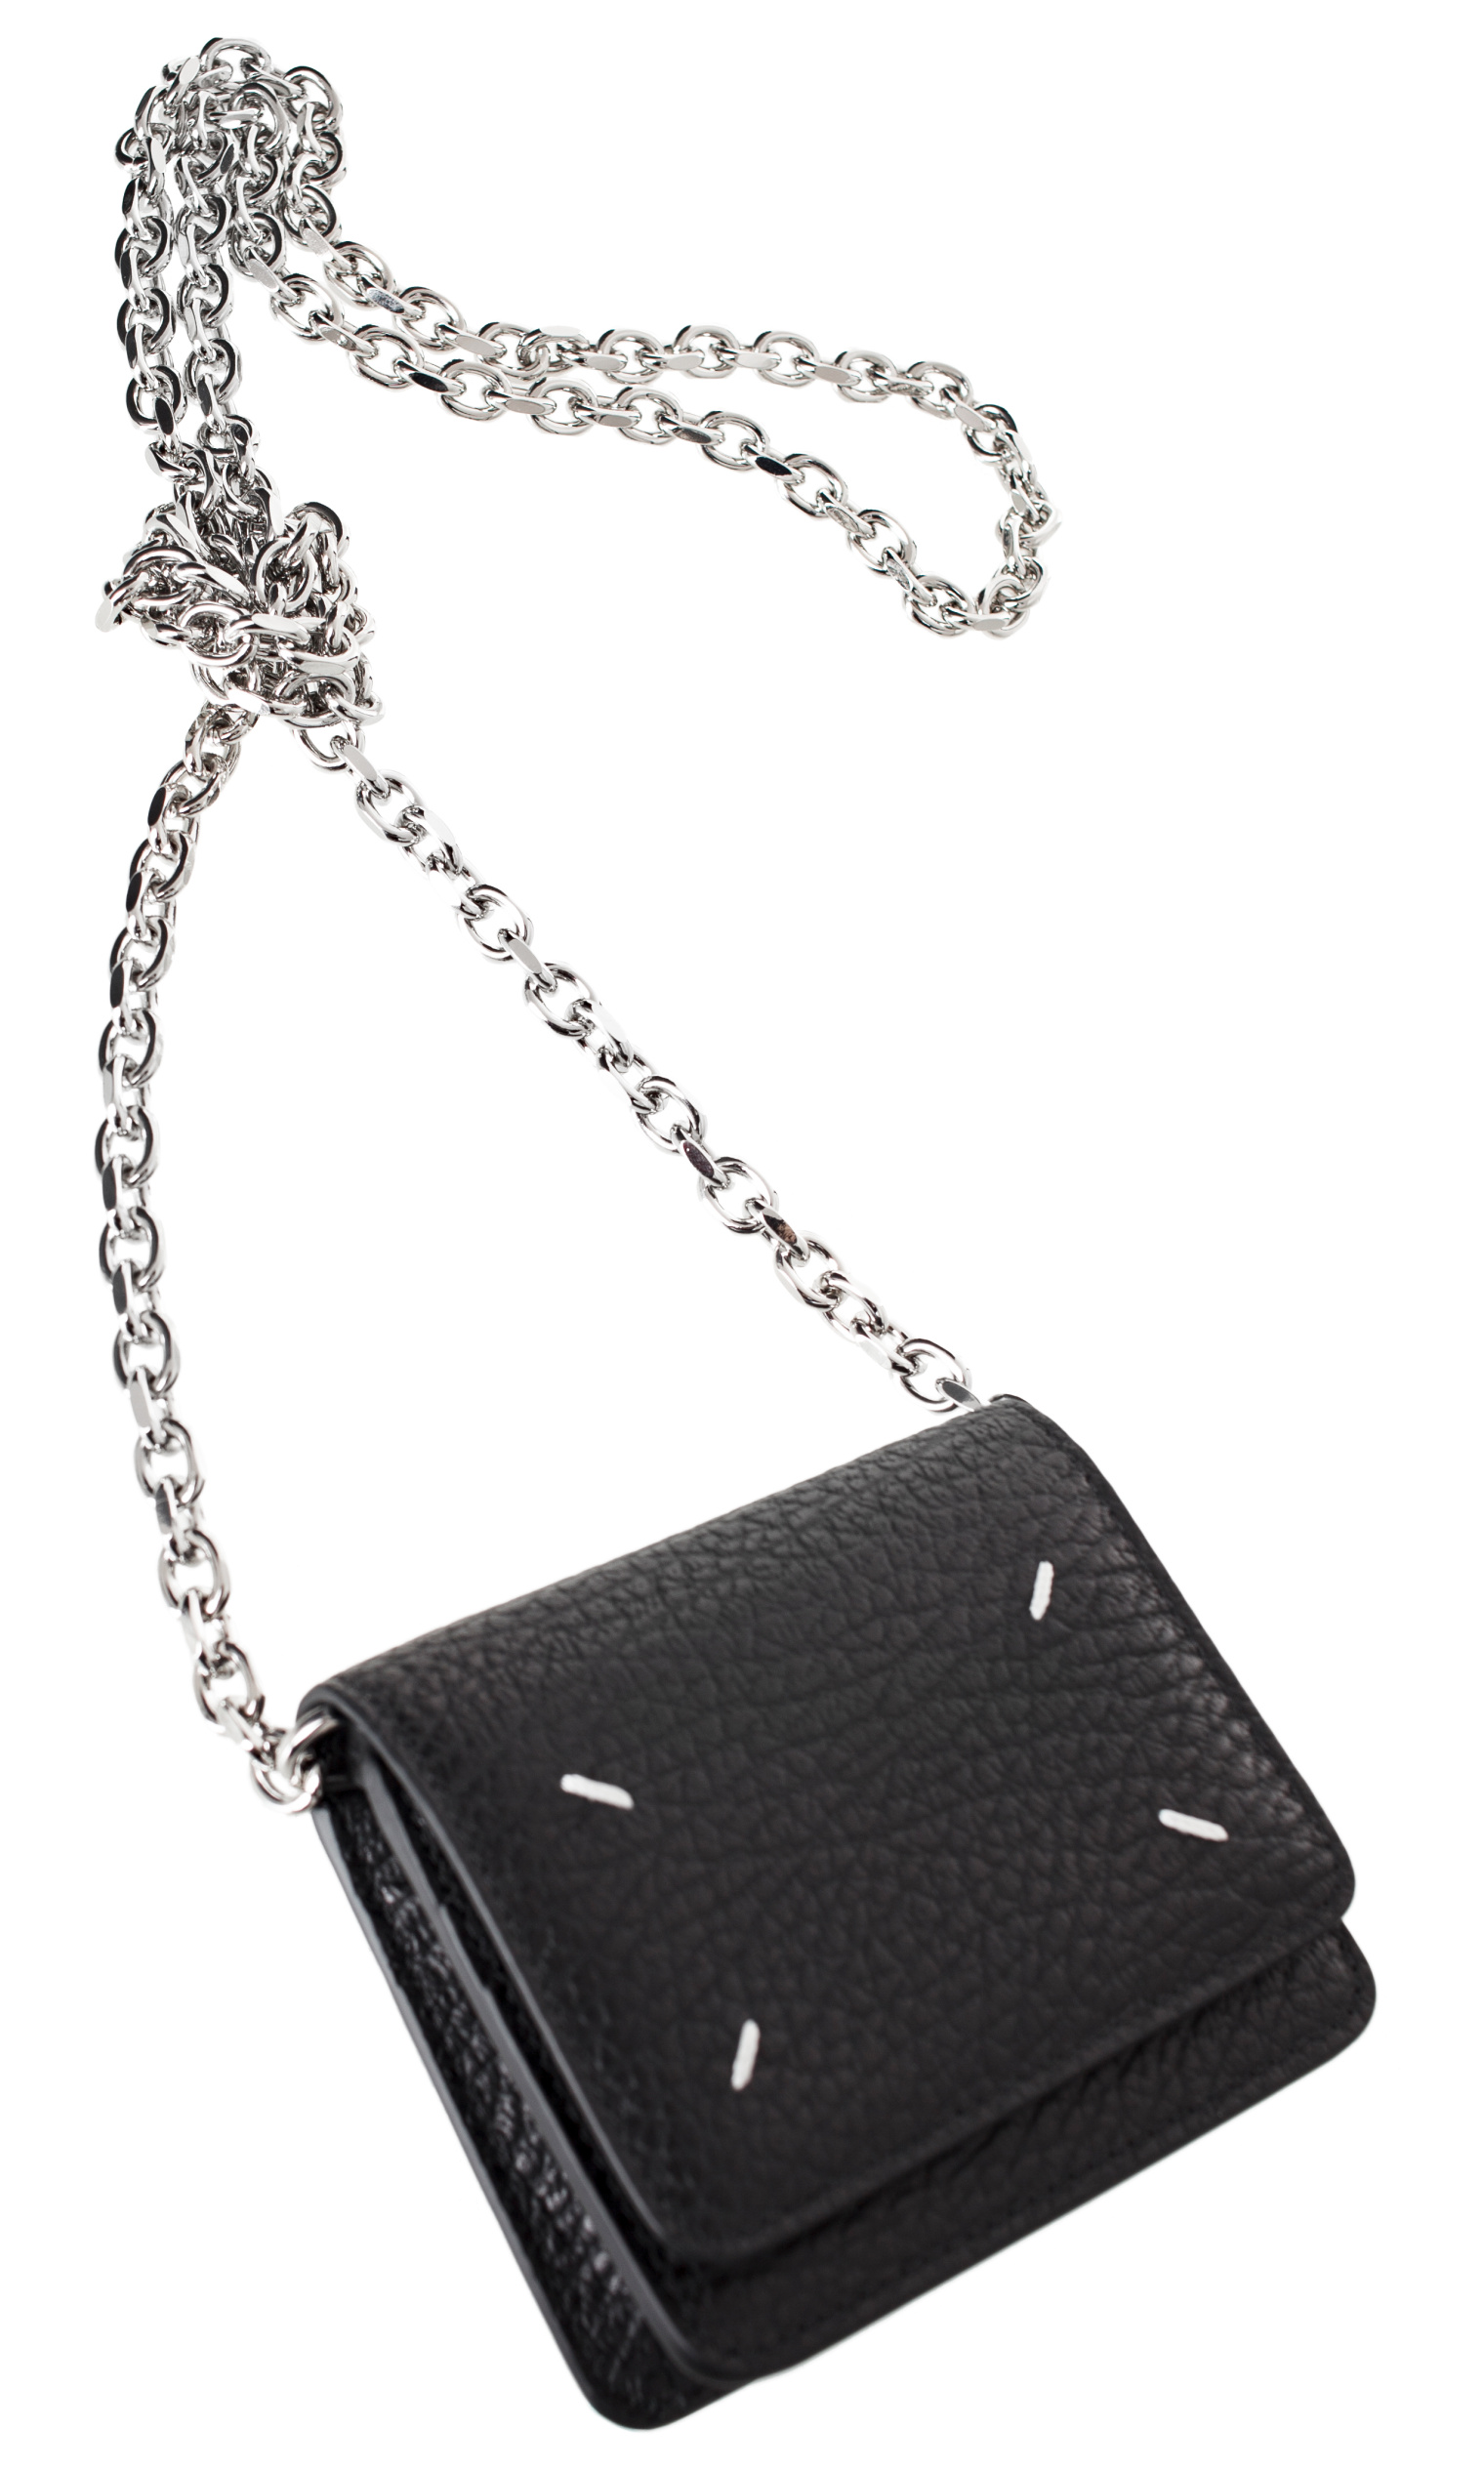 Maison Margiela Leather micro wallet on chain